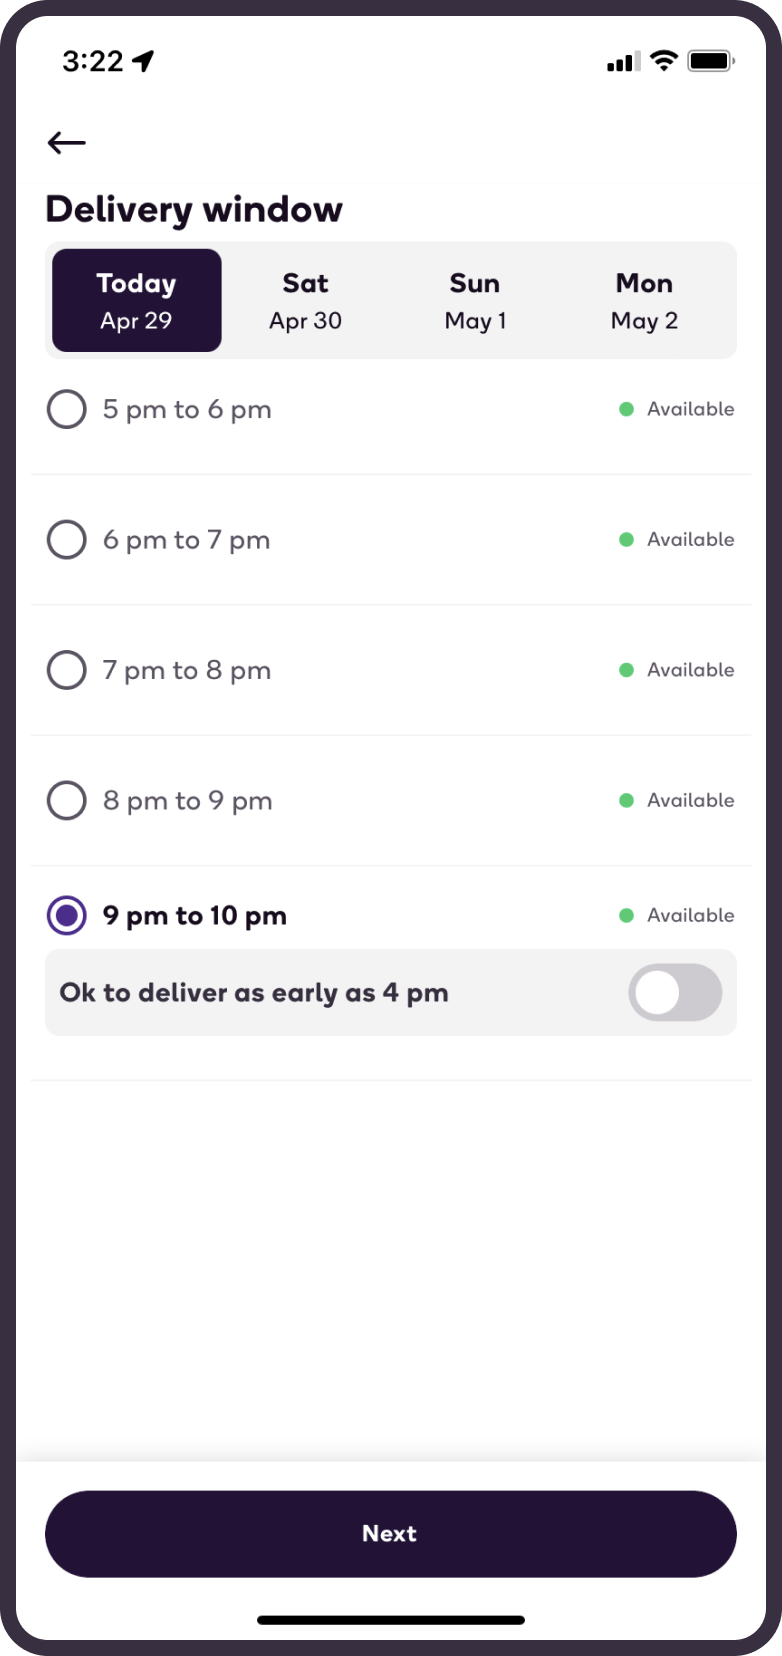 Target Delivery - Same-Day Delivery with Shipt